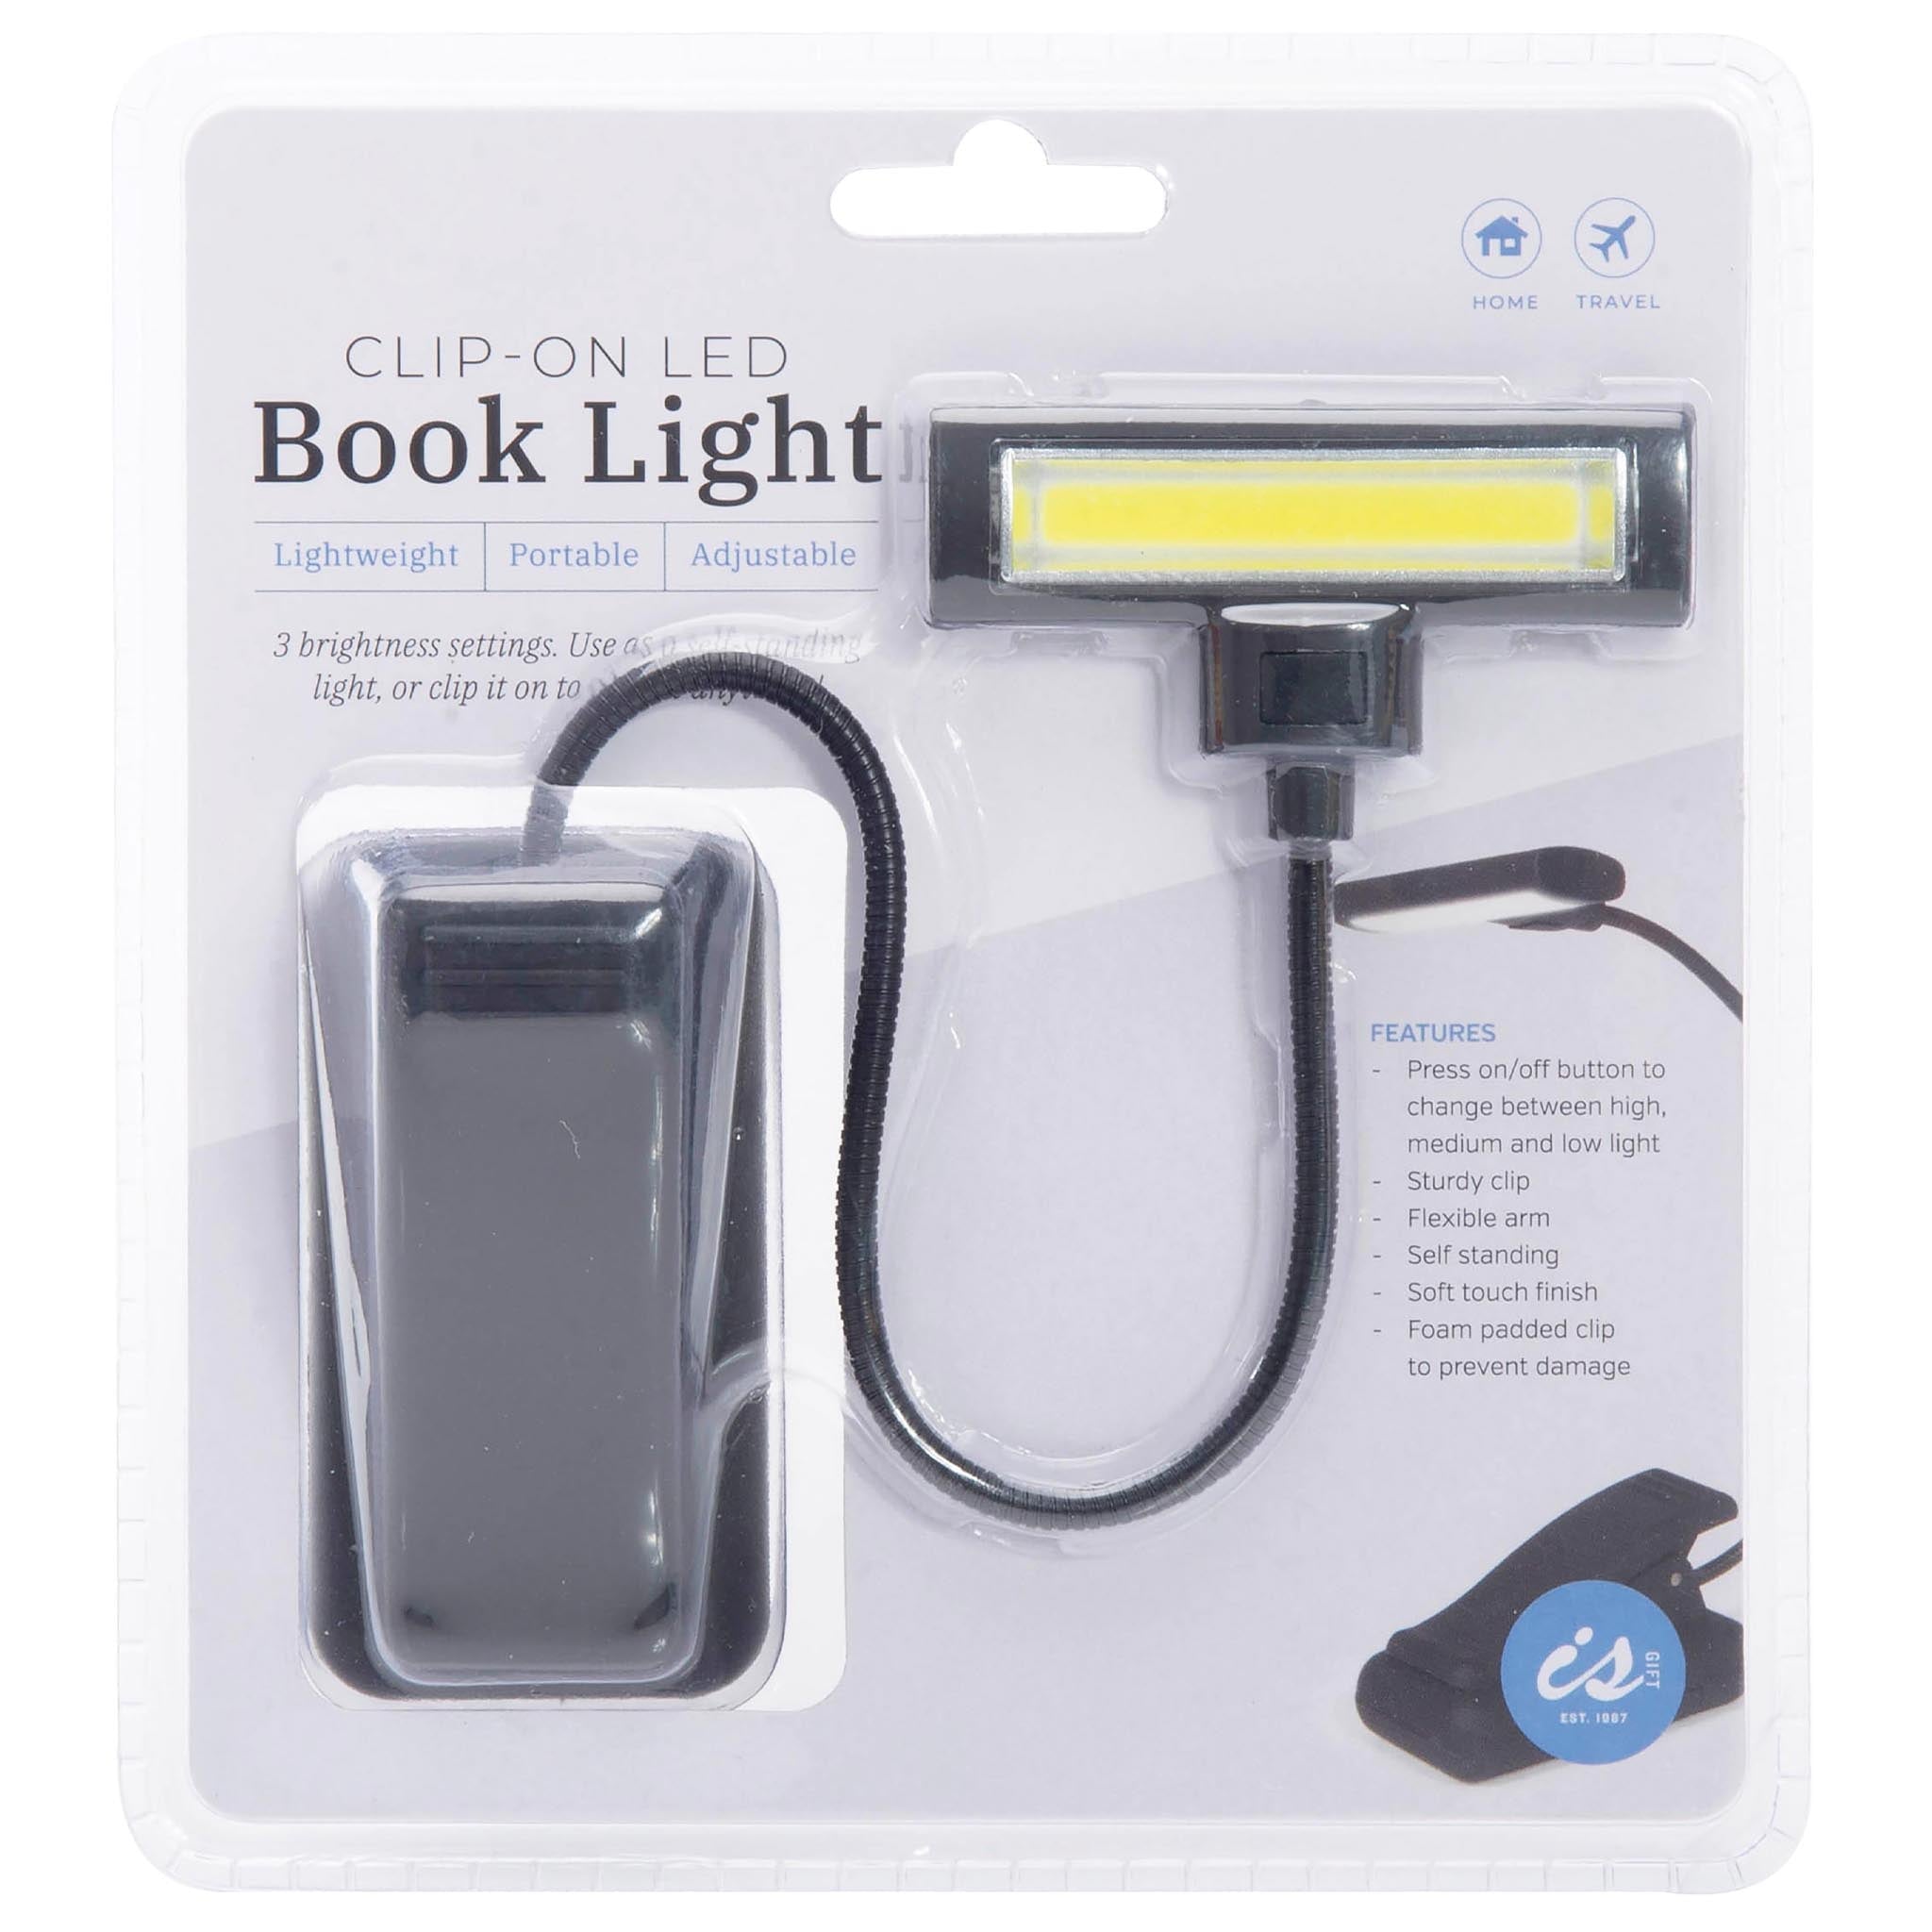 Clip-On LED Book Light Lighting Not specified 